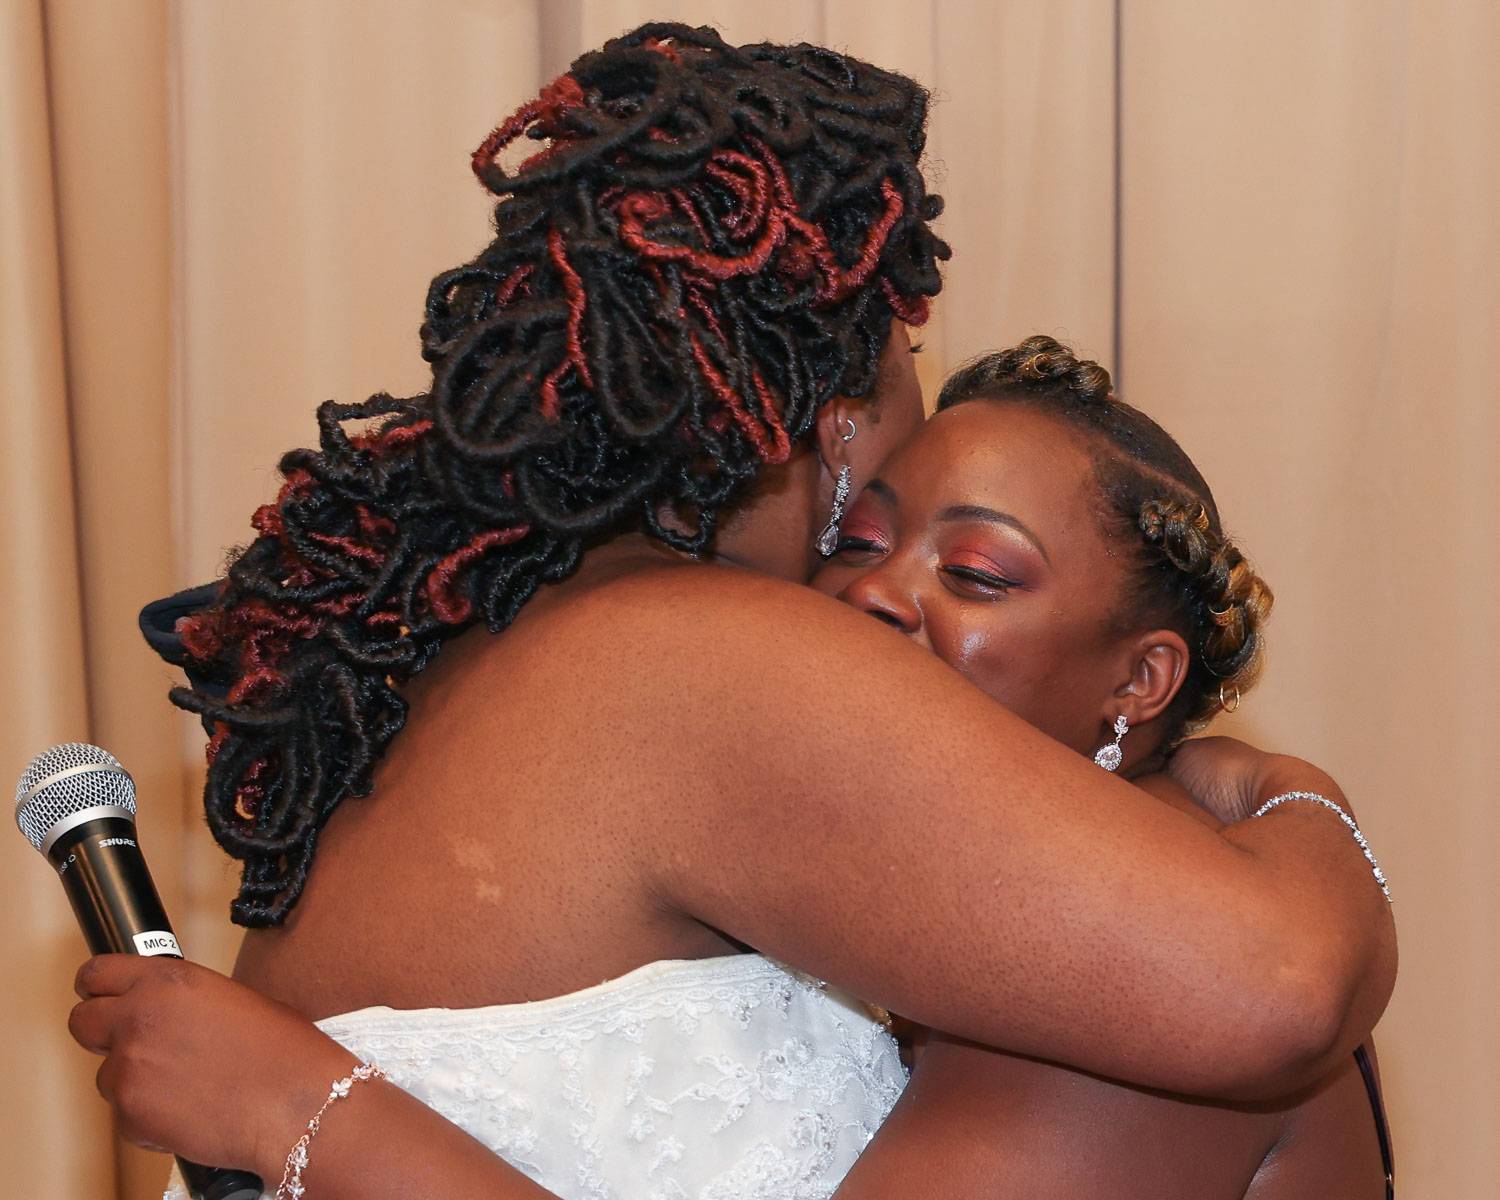 The bride and her friend crying tears of joy